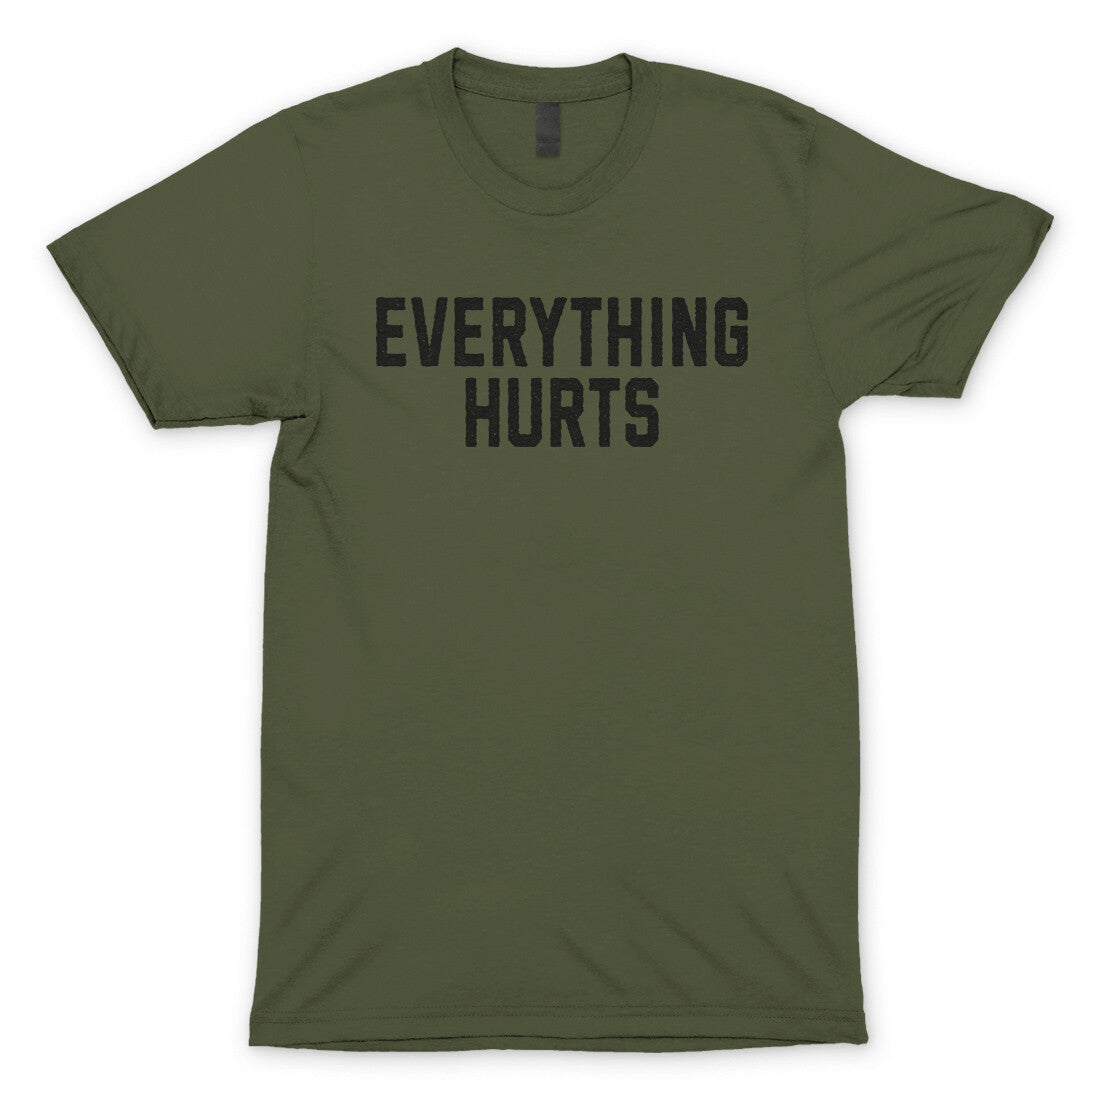 Everything Hurts in Military Green Color